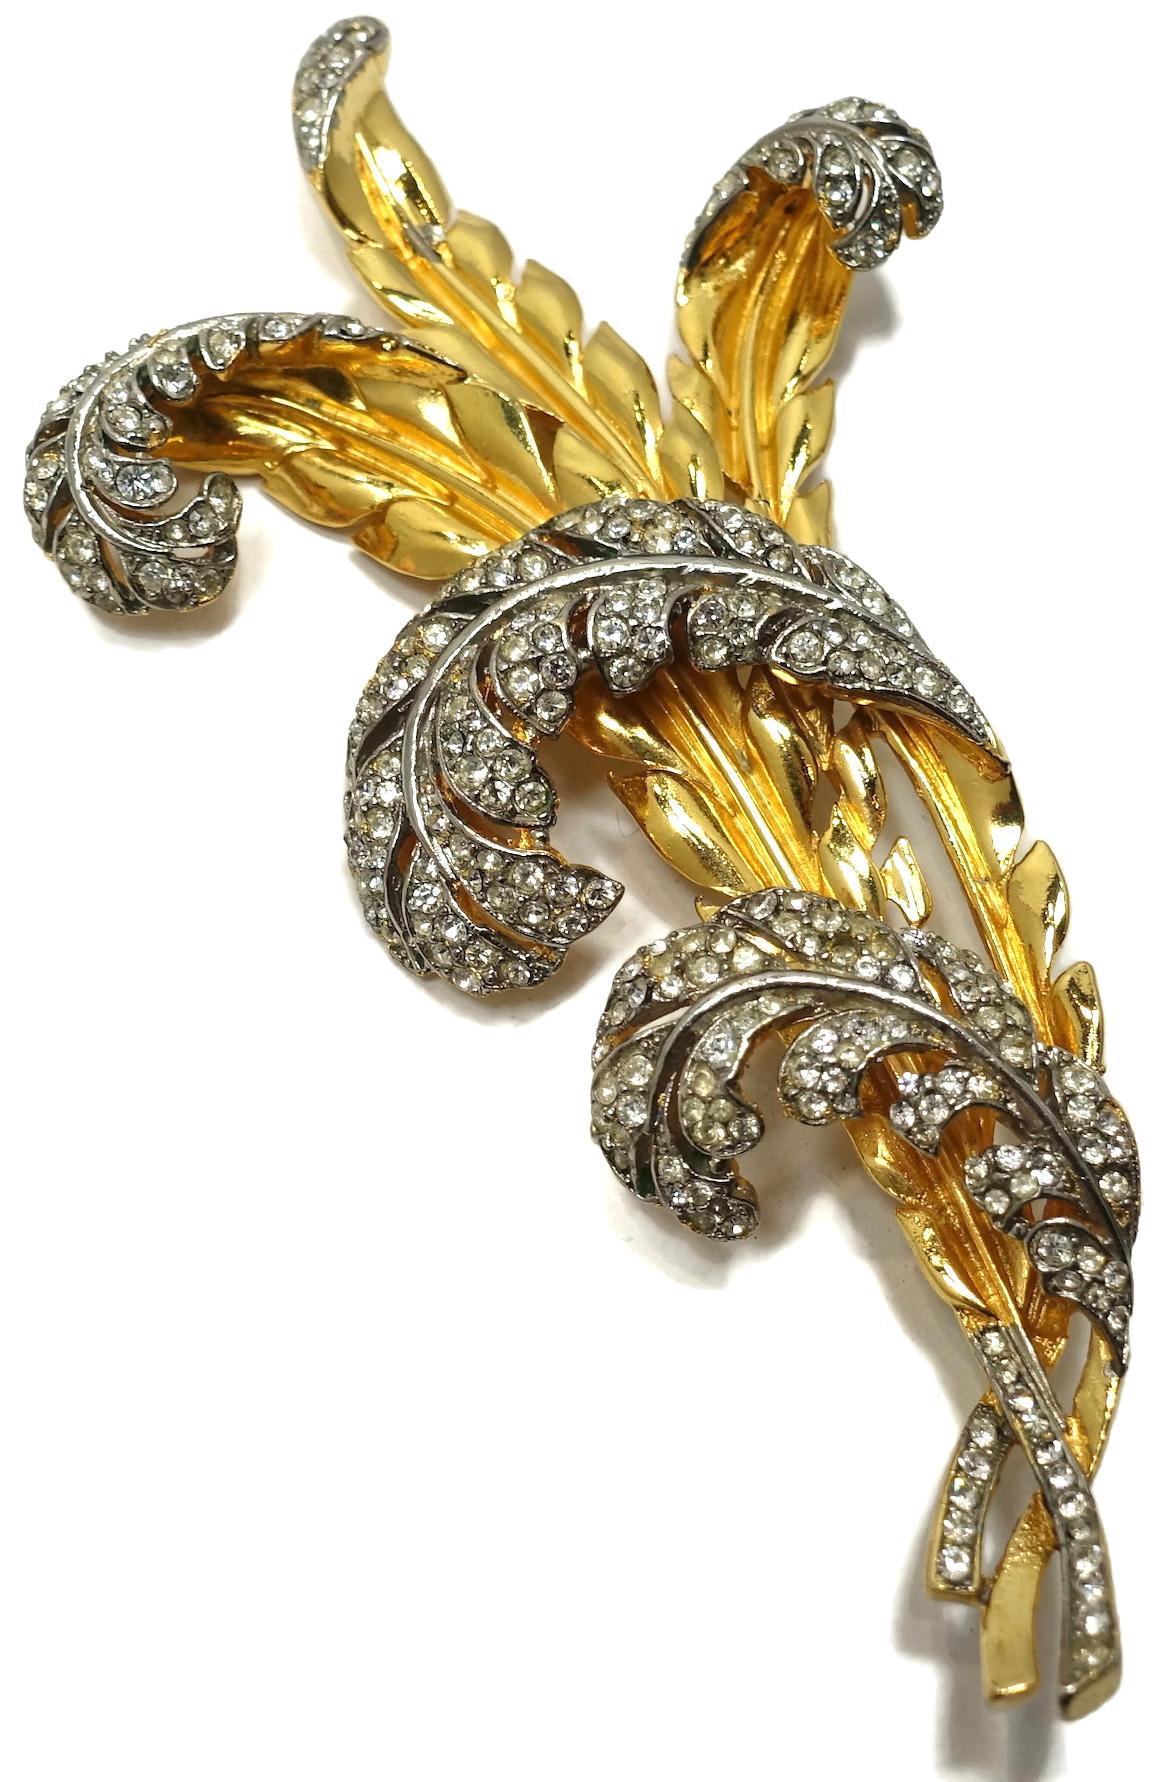 This vintage retro brooch is an unsigned Trifari. It has crystal feathers on gold tone ornate stems.  In excellent condition, this brooch measures 3” x 2-5/8”.